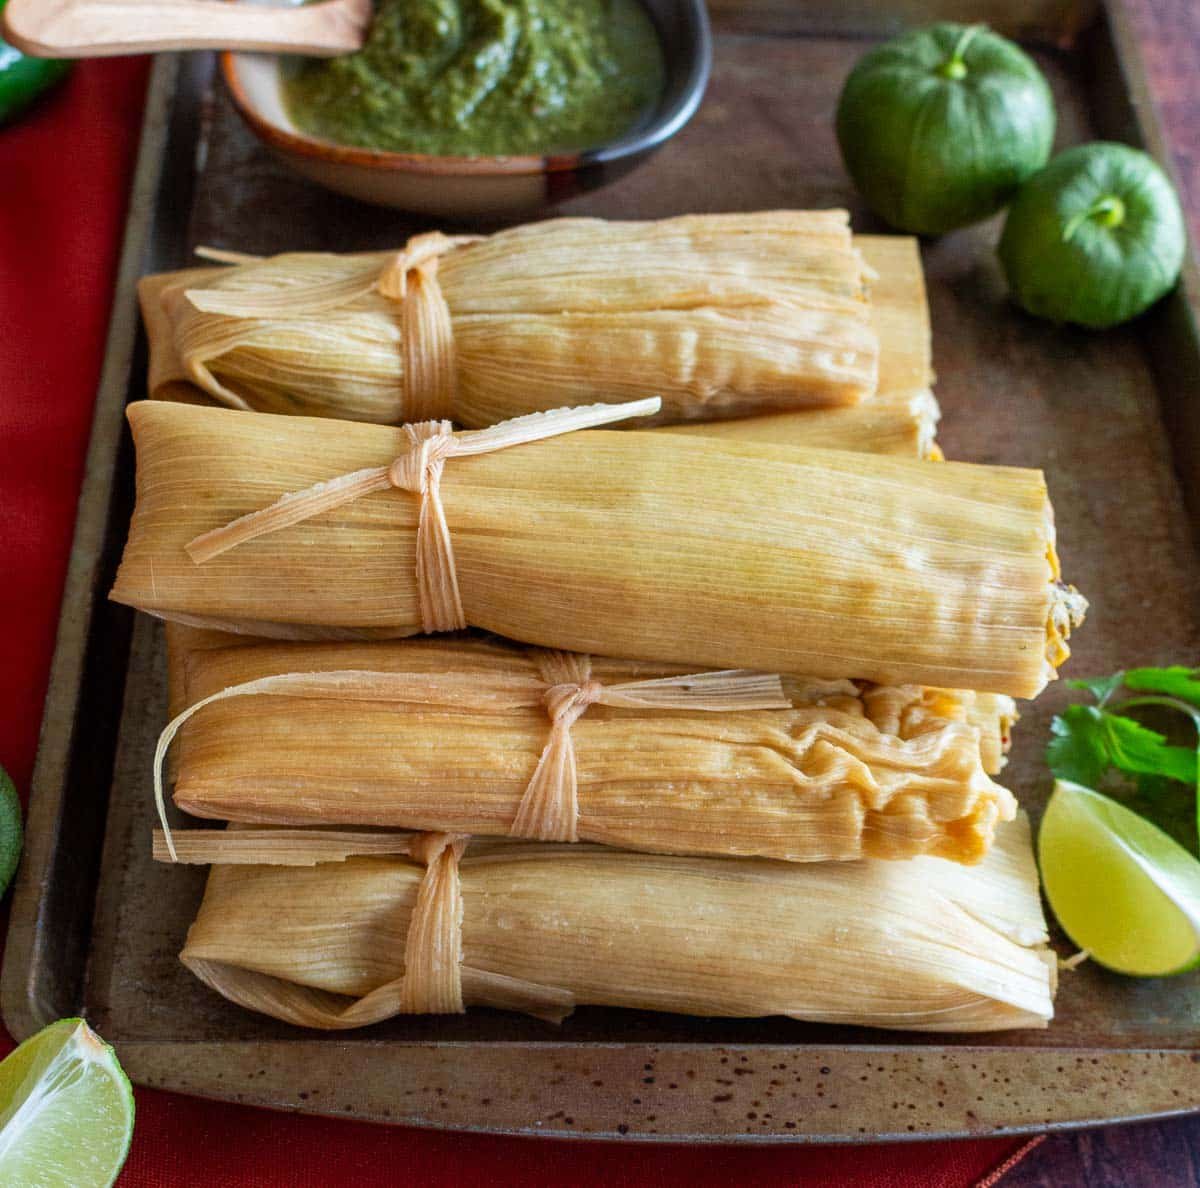 Lots of vegetarian tamales verde stacked up on a brown plate with extra roasted tomatillo salsa on the side.